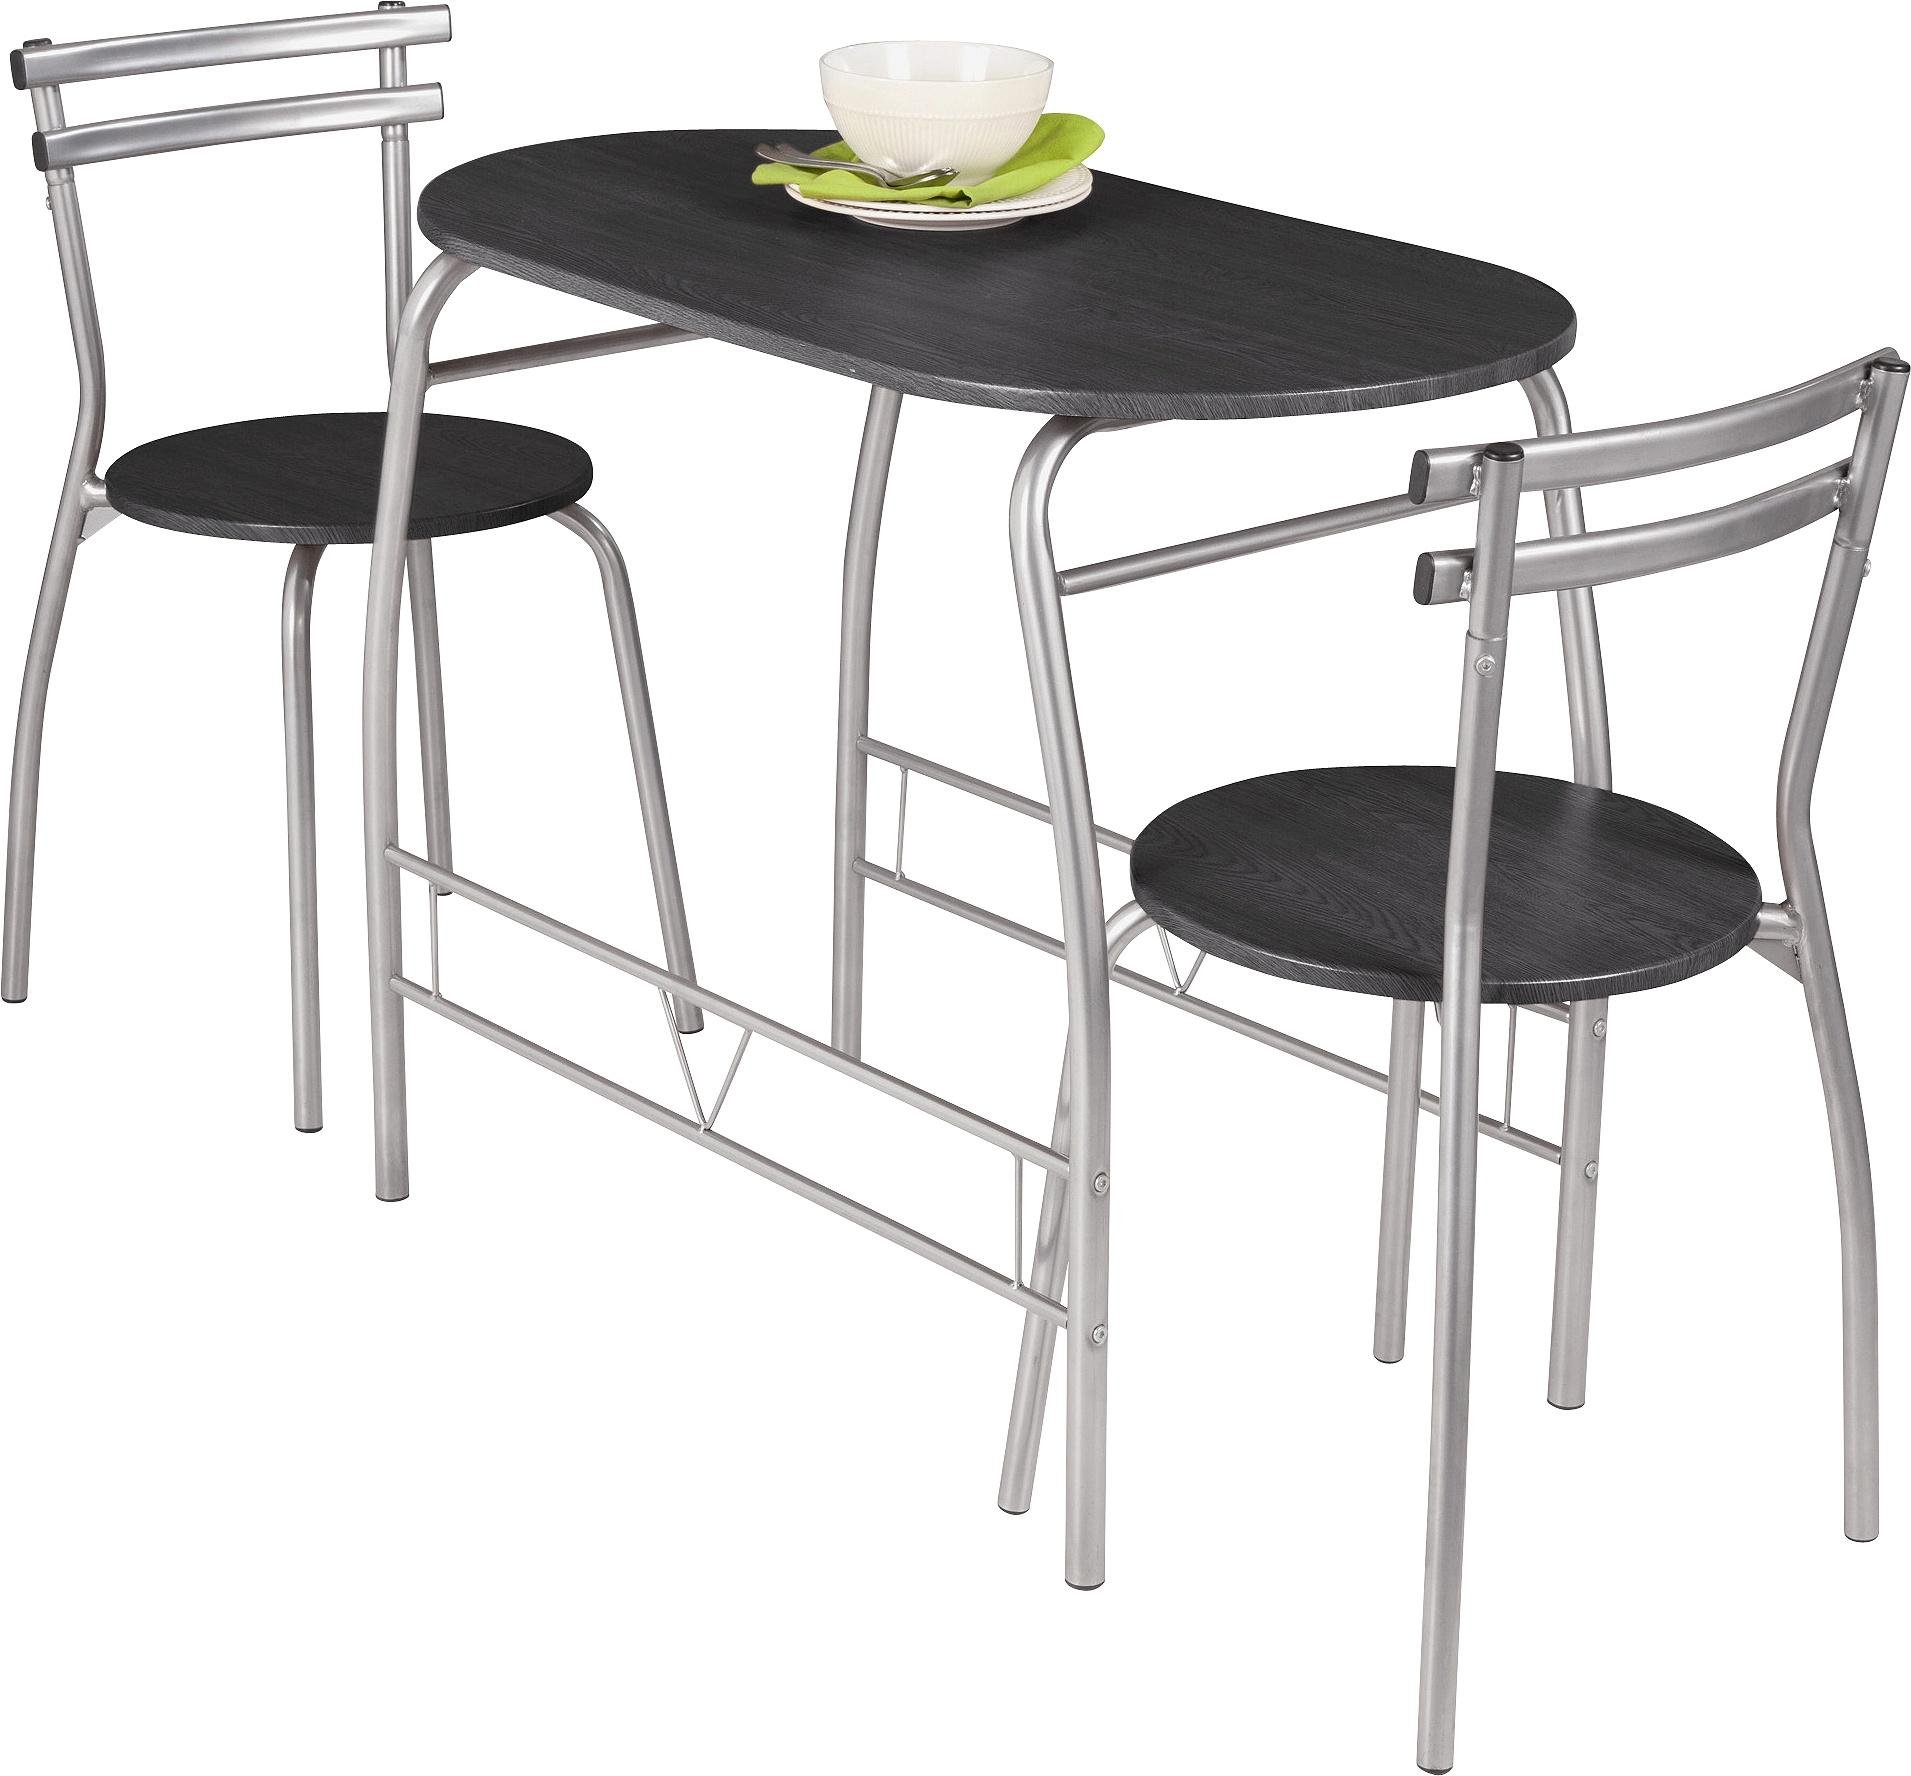 'Home Vegas Dining Table & 2 Chairs - Black